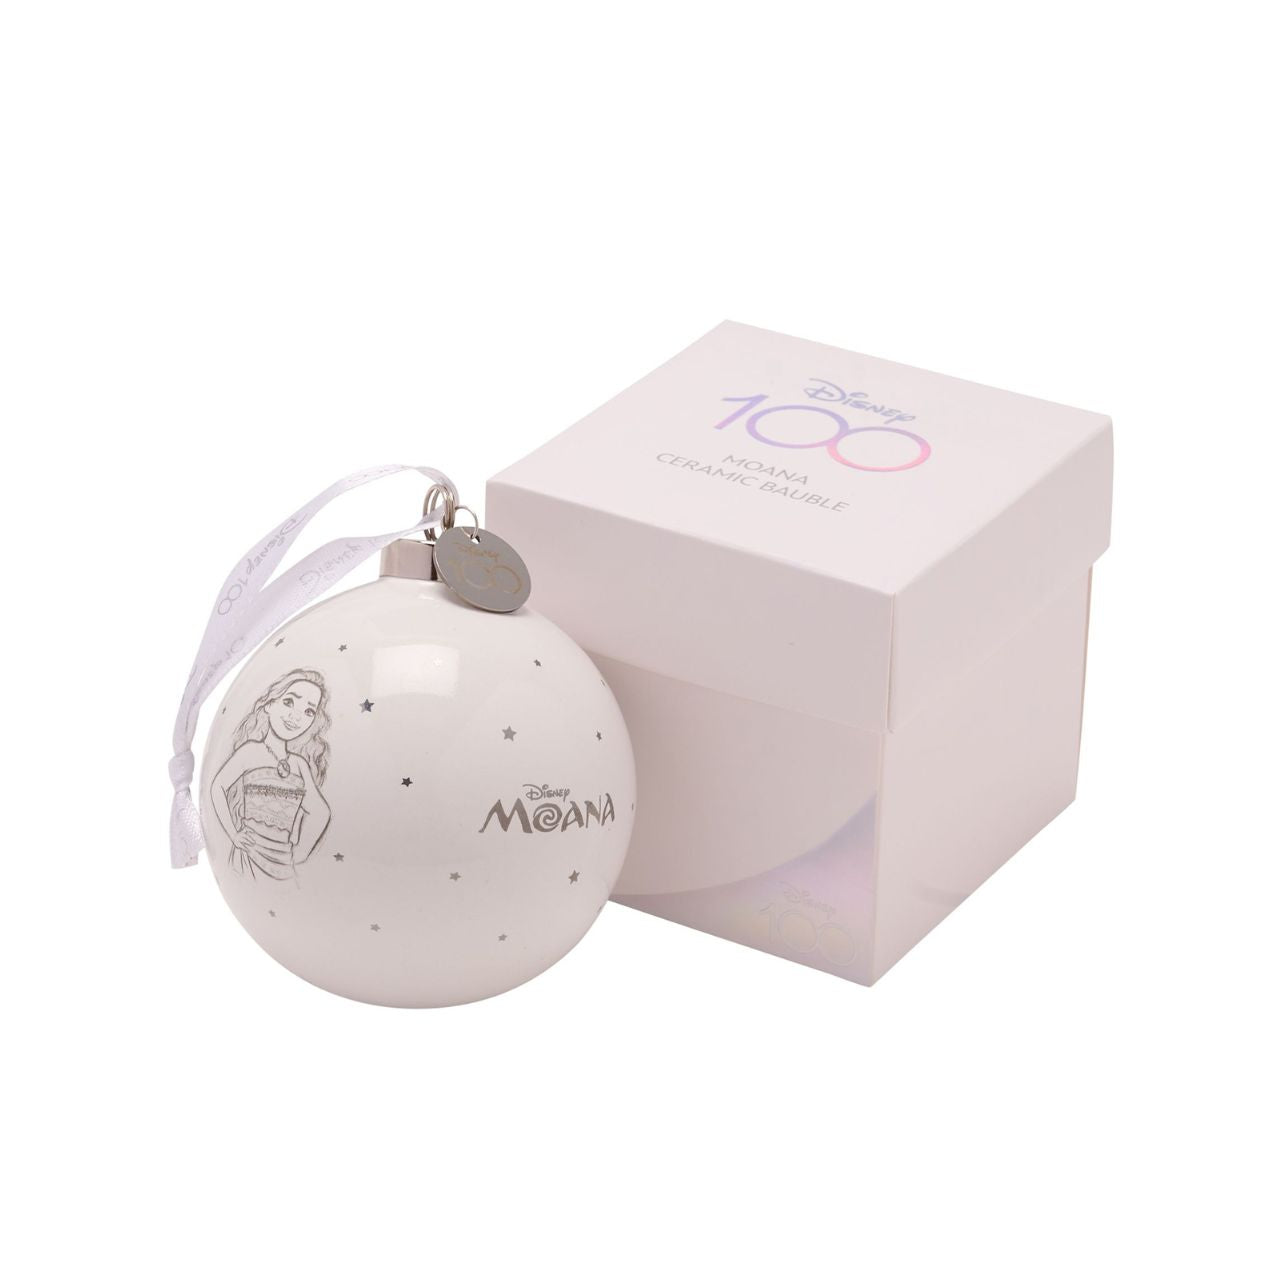 Disney 100th Anniversary Bauble - Moana  A Moana bauble from Disney 100 by DISNEY.  This magical tree decoration captures the true magic of Disney on its centenary and can be enjoyed by fans of all ages at Christmas.